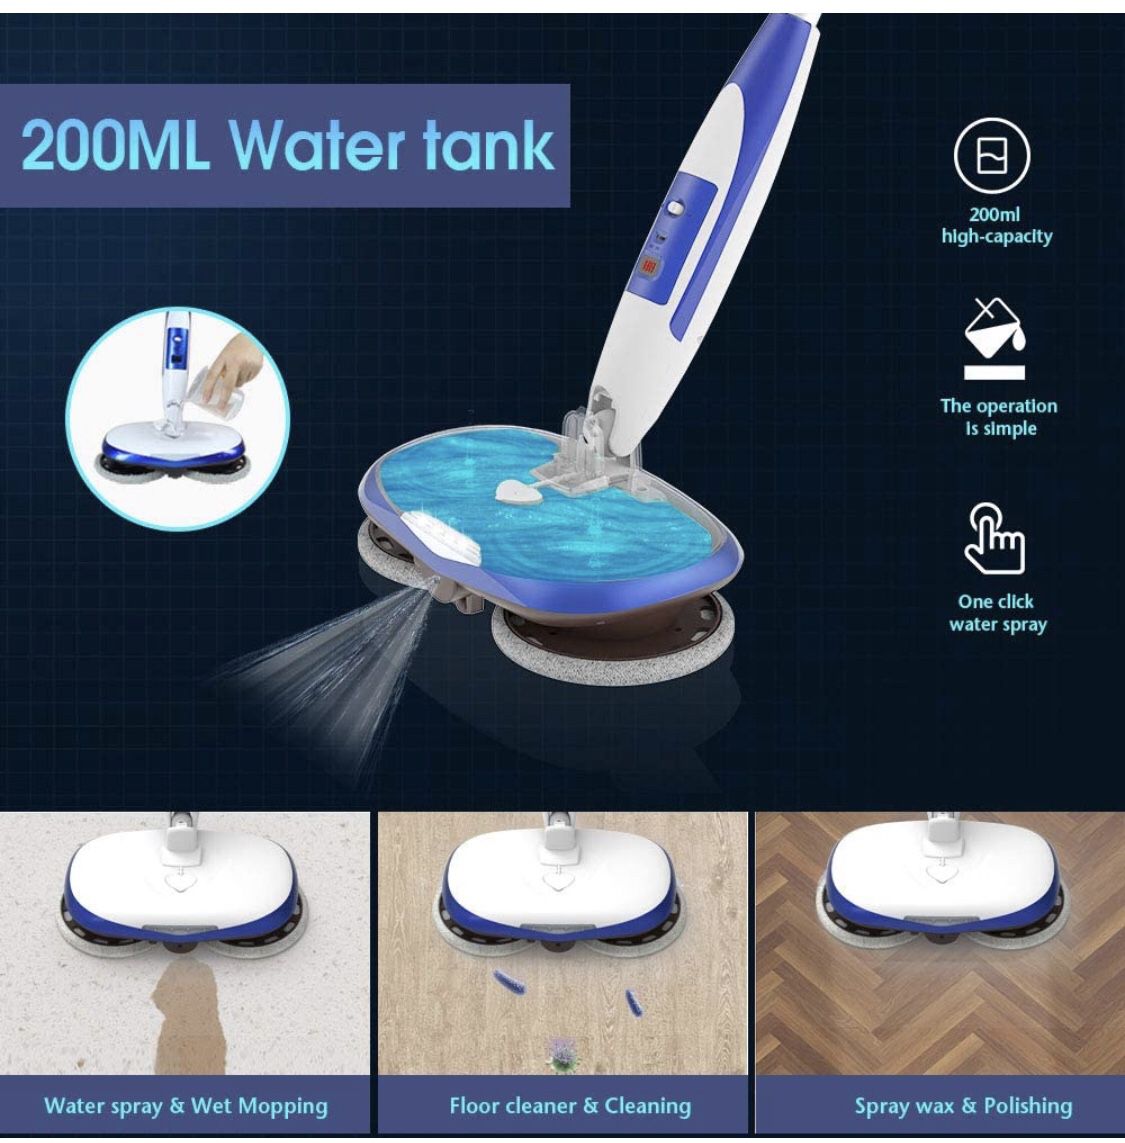 Cordless Electric Spin Mop, Floor Cleaner with Built-in 200ml Water Tank, Blue